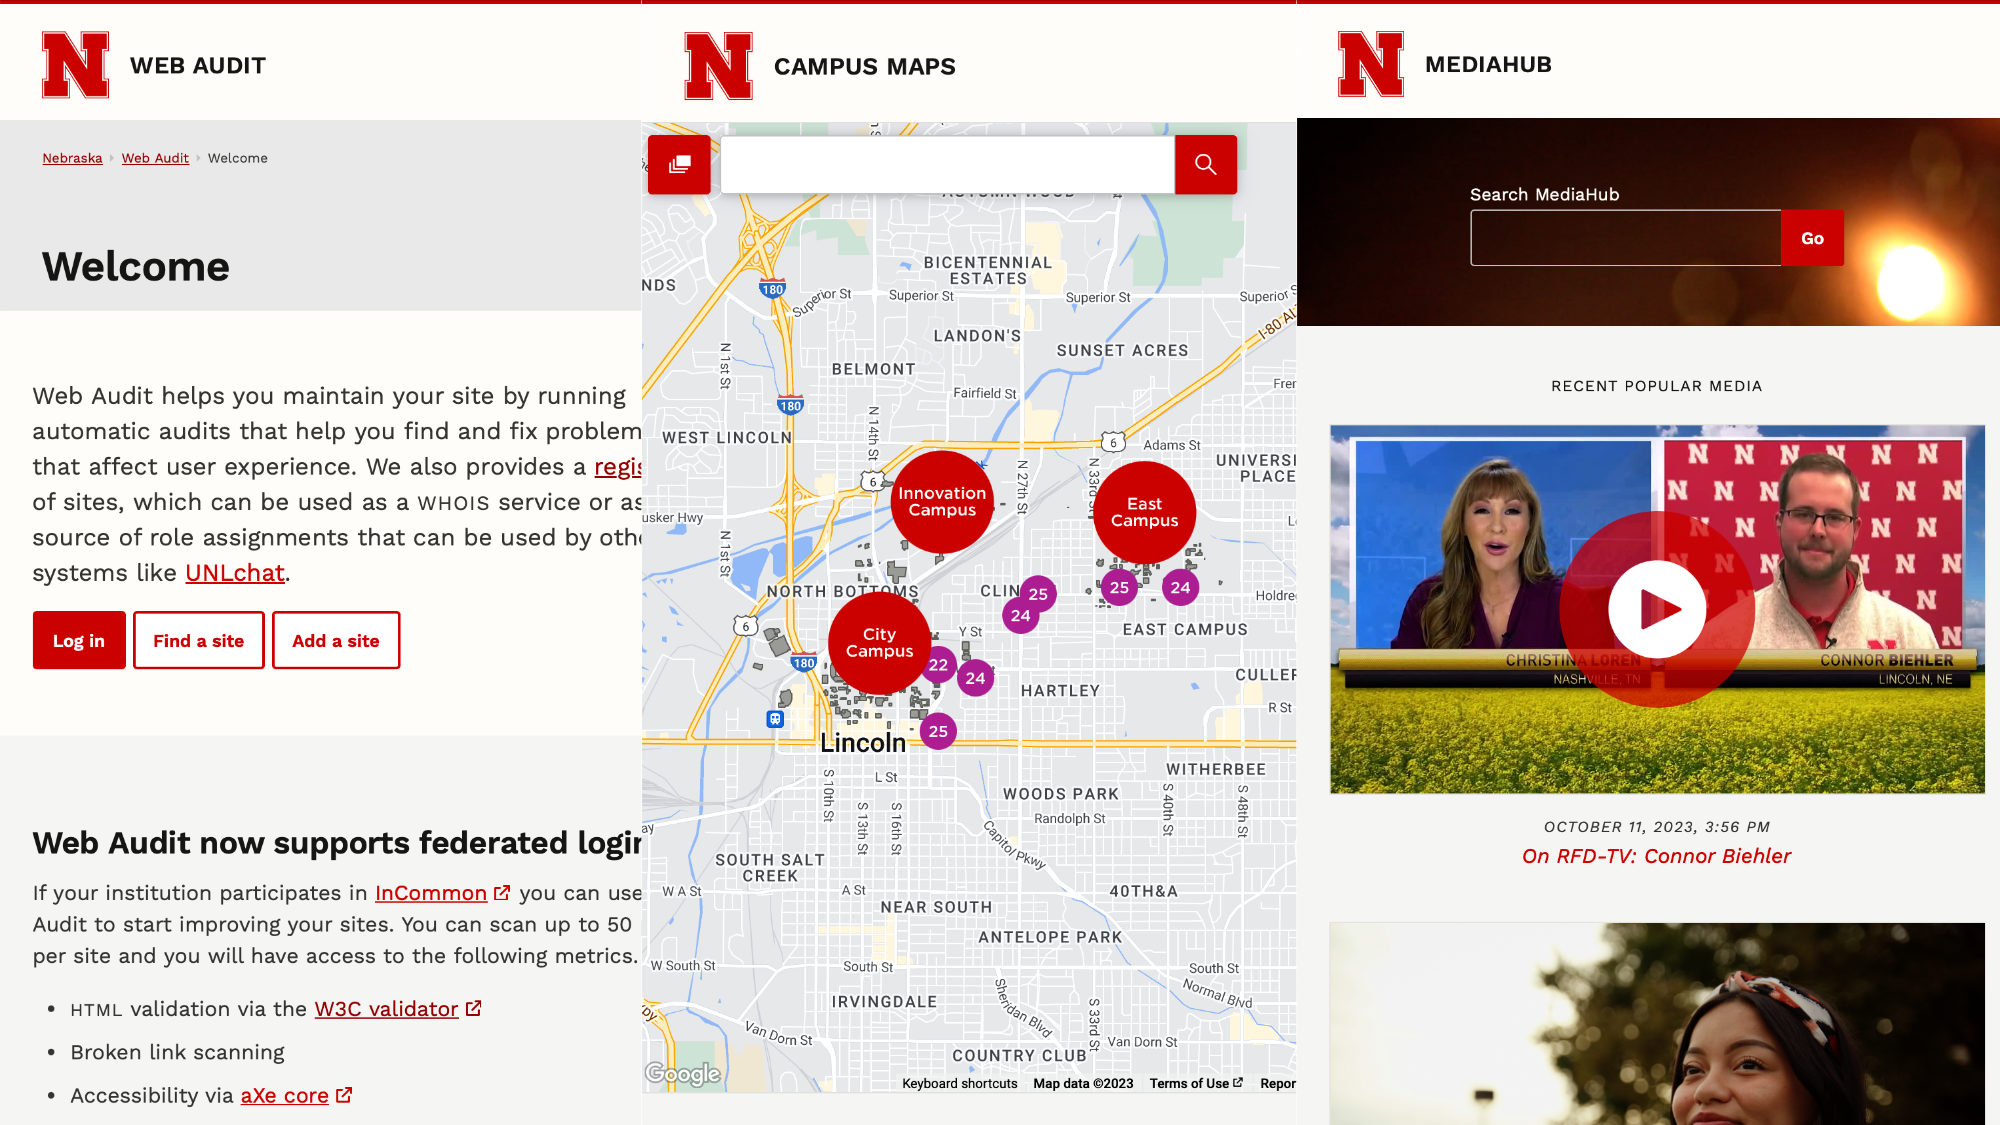 Screenshot of public information applications Web Audit, Campus Maps and Mediahub